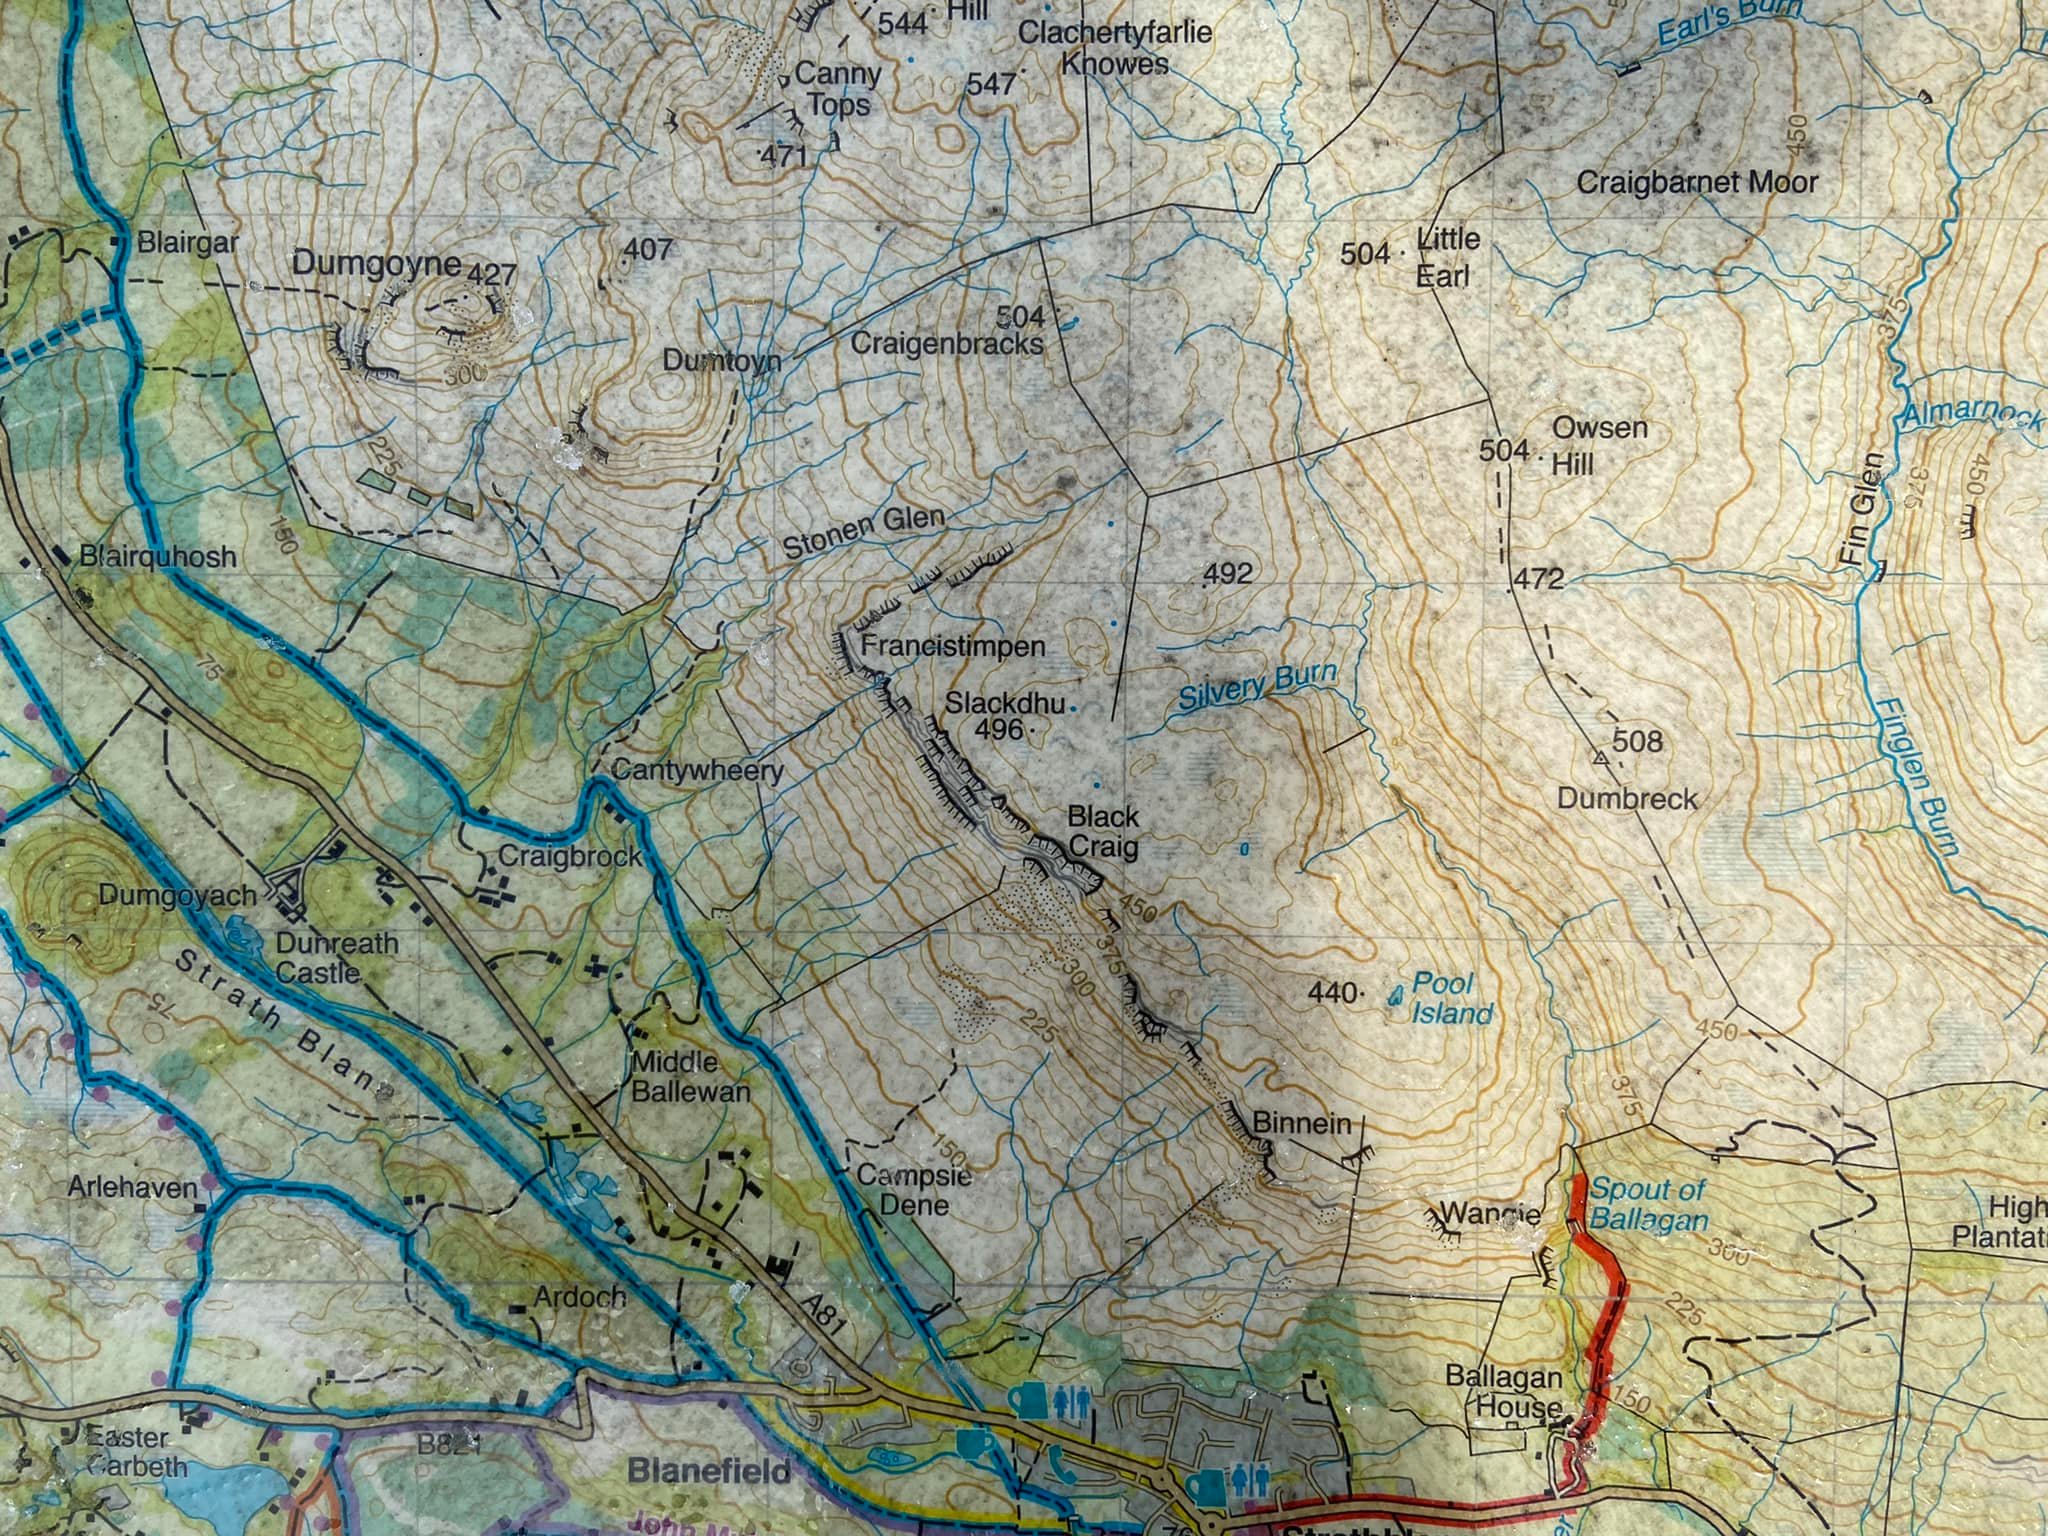 Map of Slackdhu on the Campsie Fells above Blanefield and Strathblane